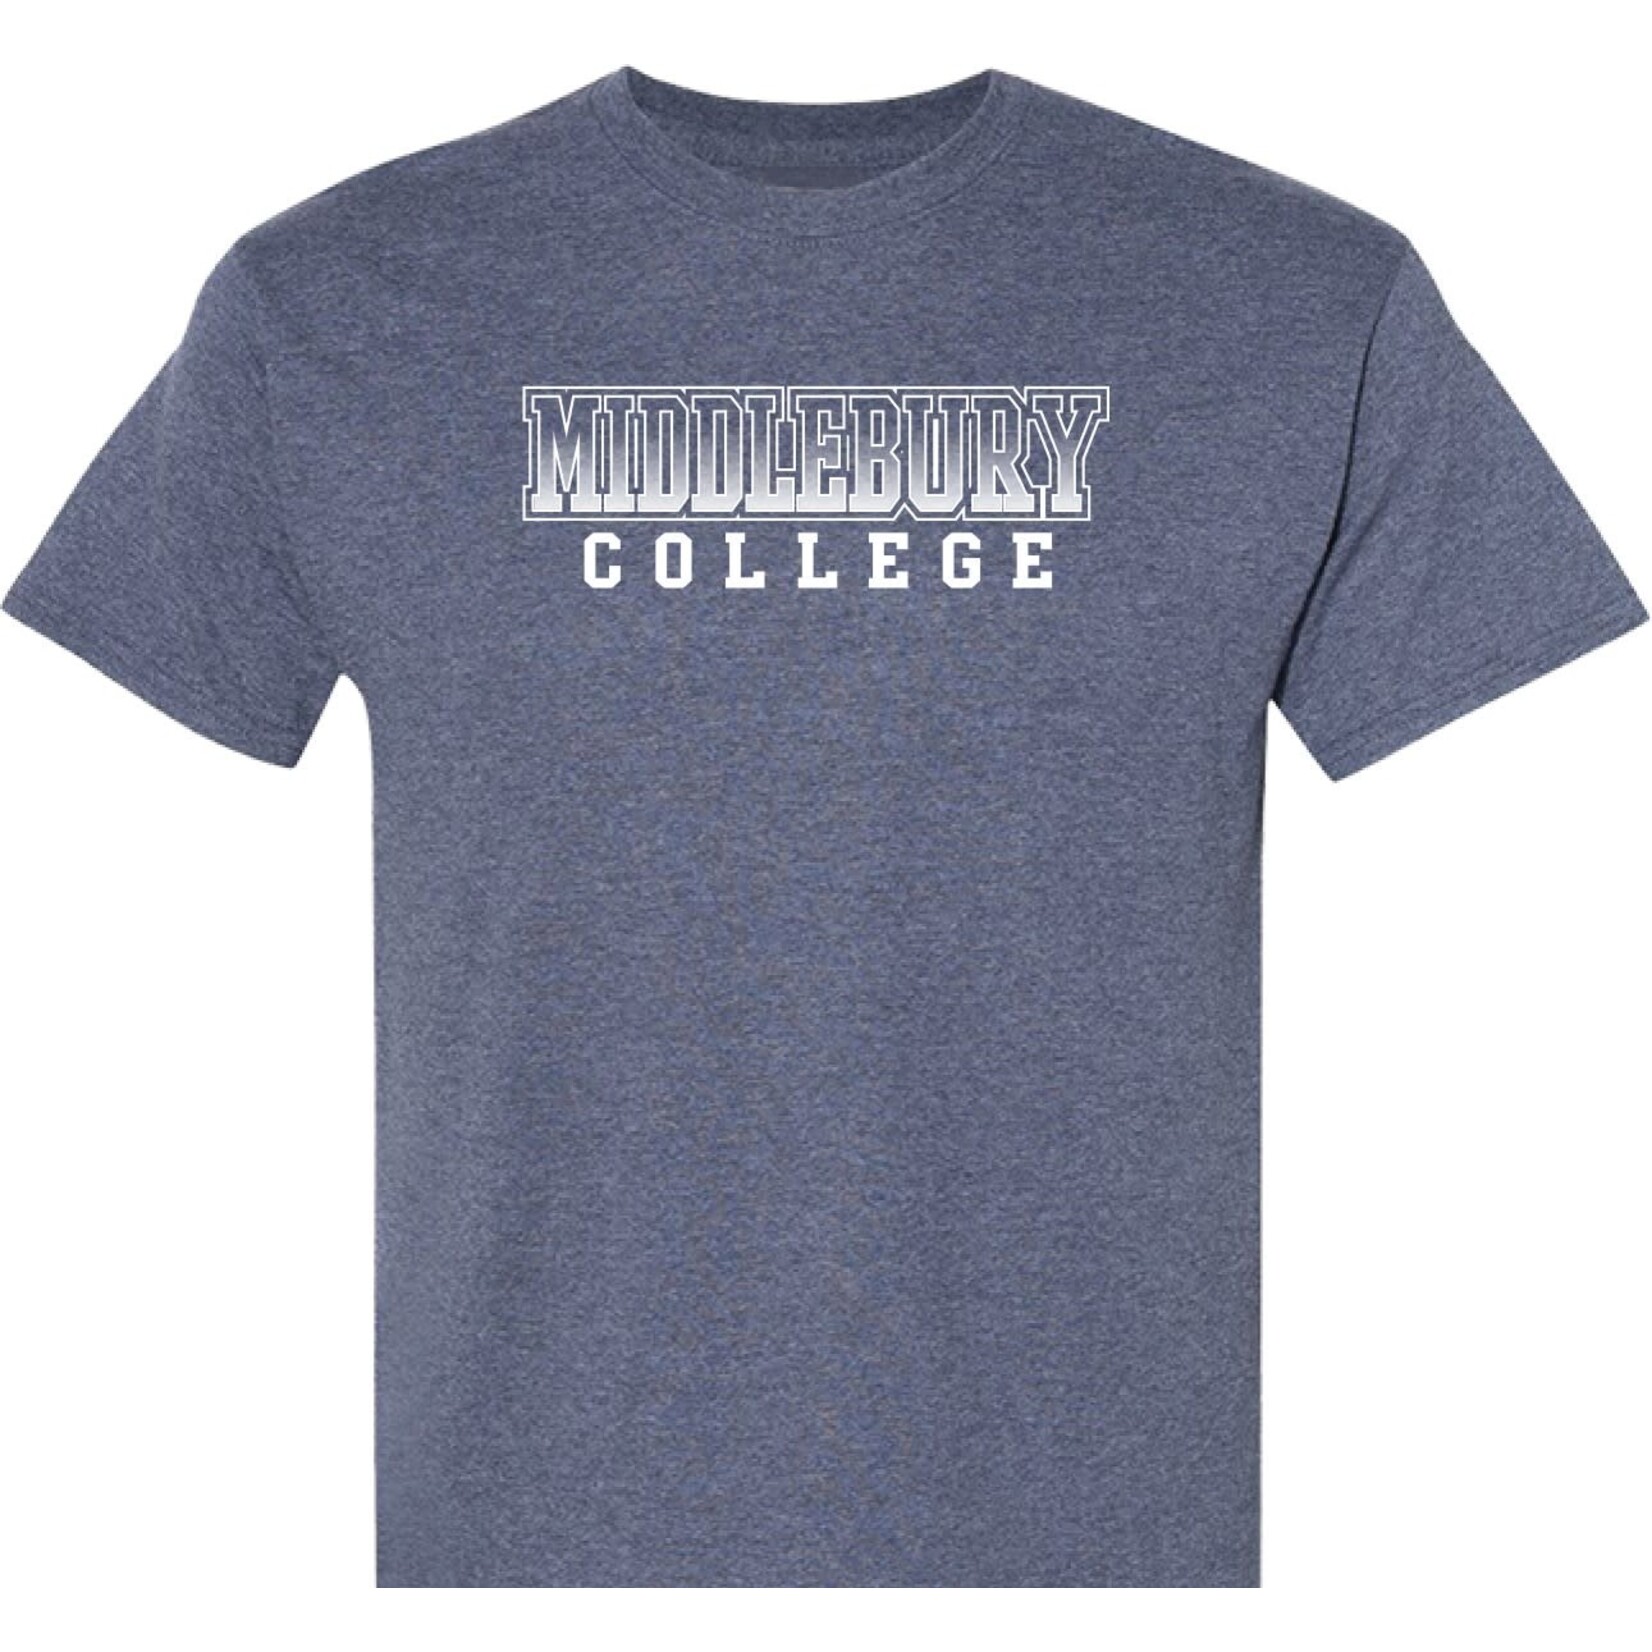 COLLEGE HOUSE MIDDLEBURY TEE